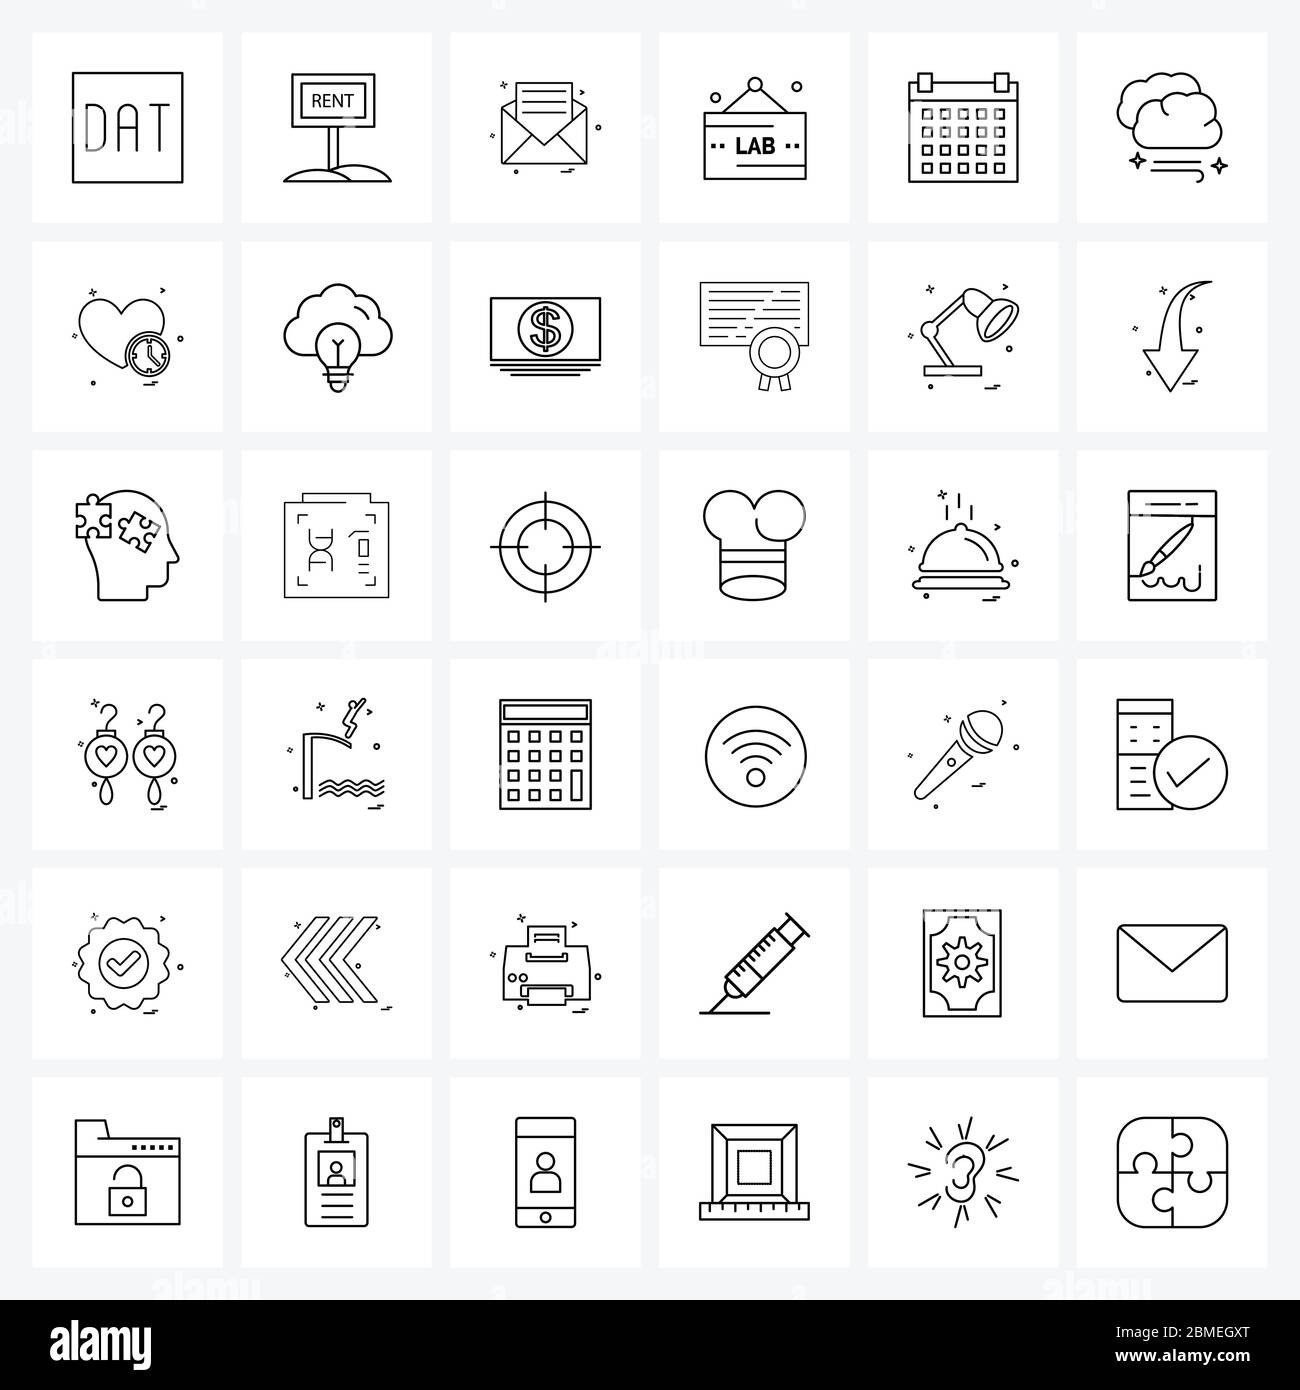 Set of 36 Modern Line Icons of space, lab, rental, letter, chat Vector Illustration Stock Vector